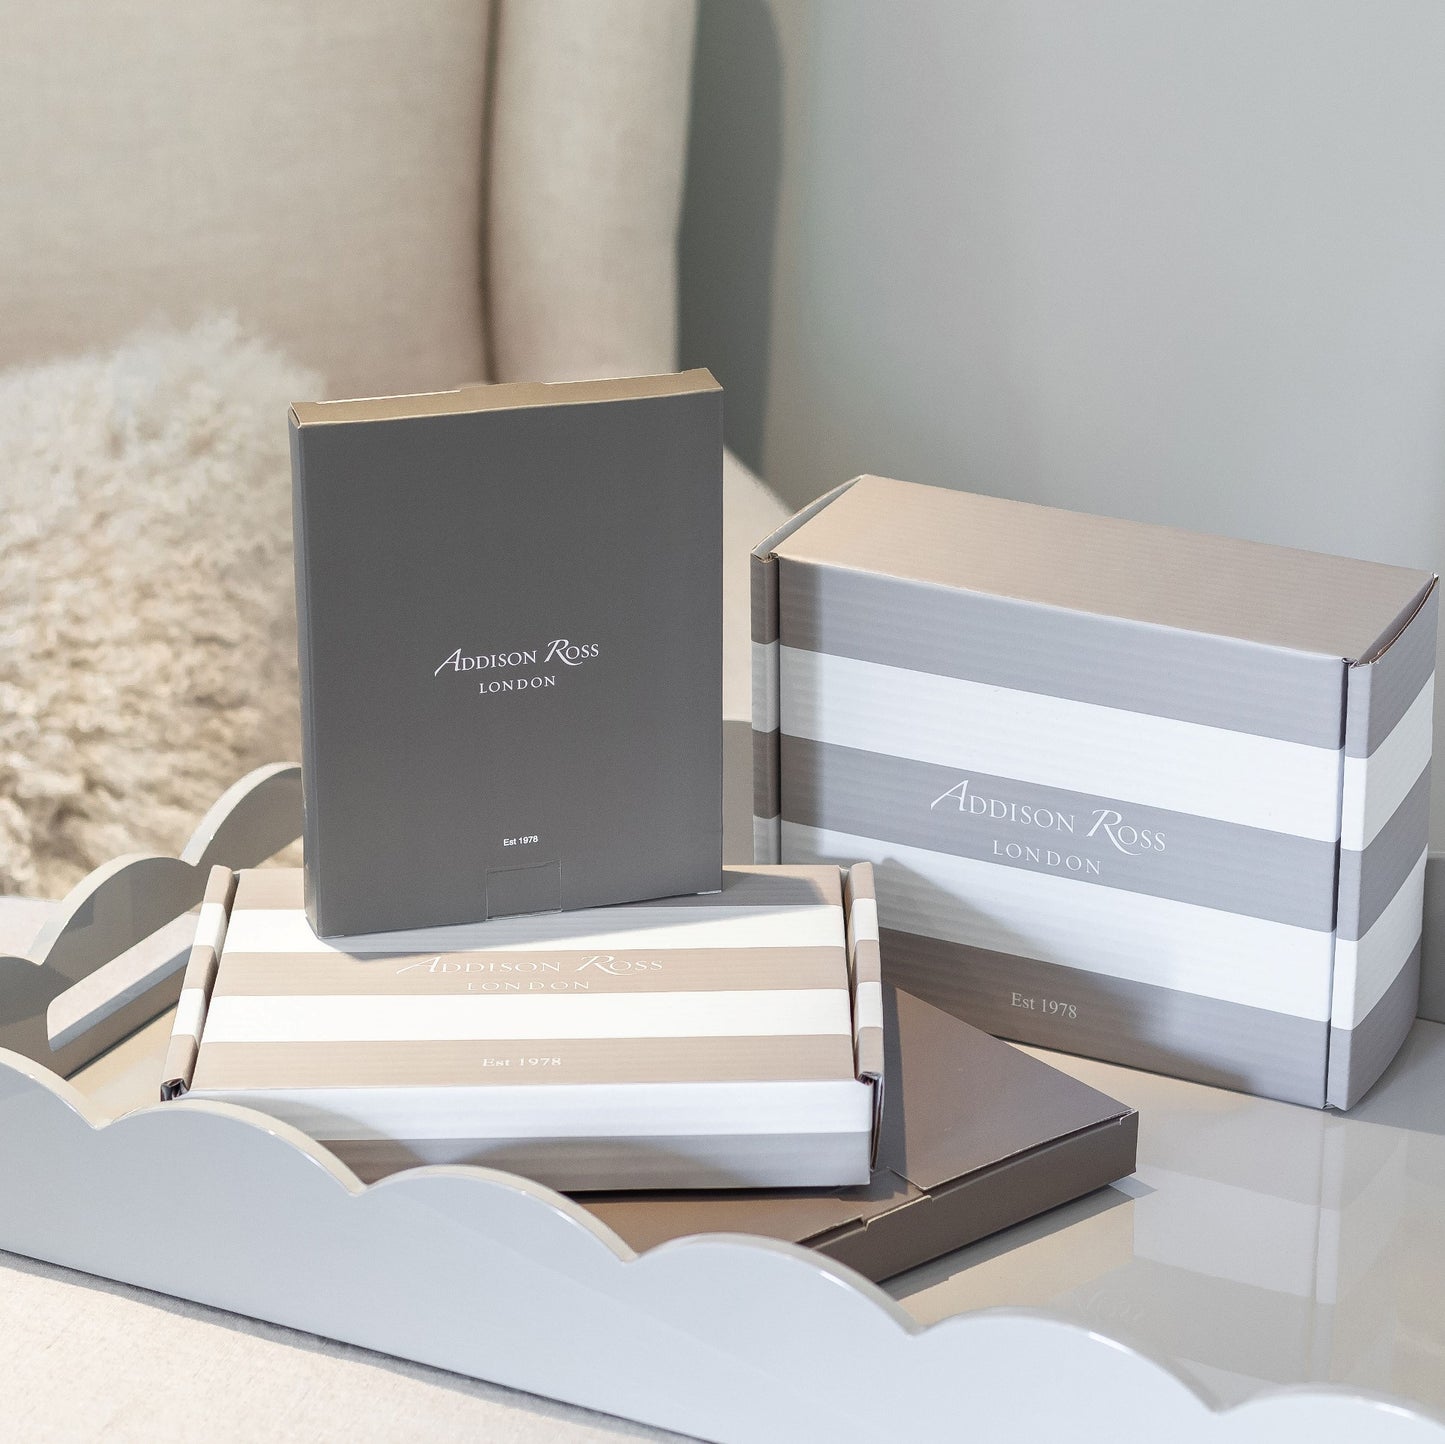 Addison Ross gift boxes